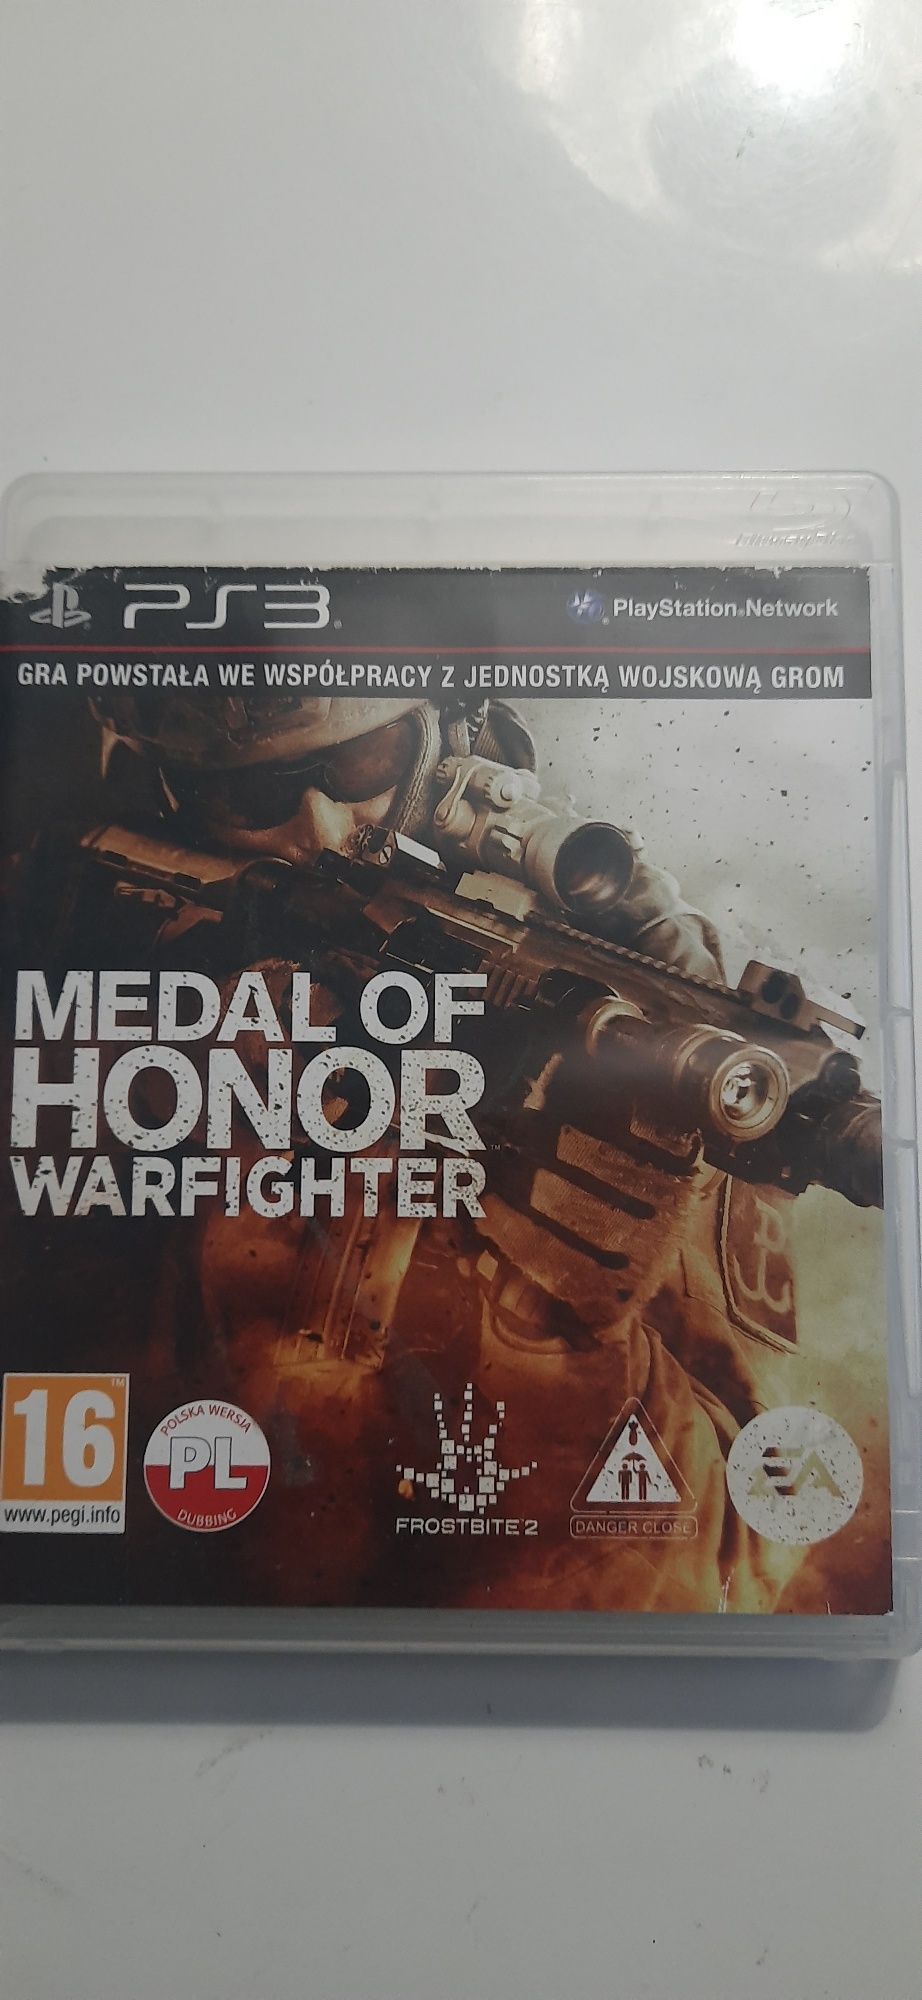 Medal of honor warfighter pl na ps3